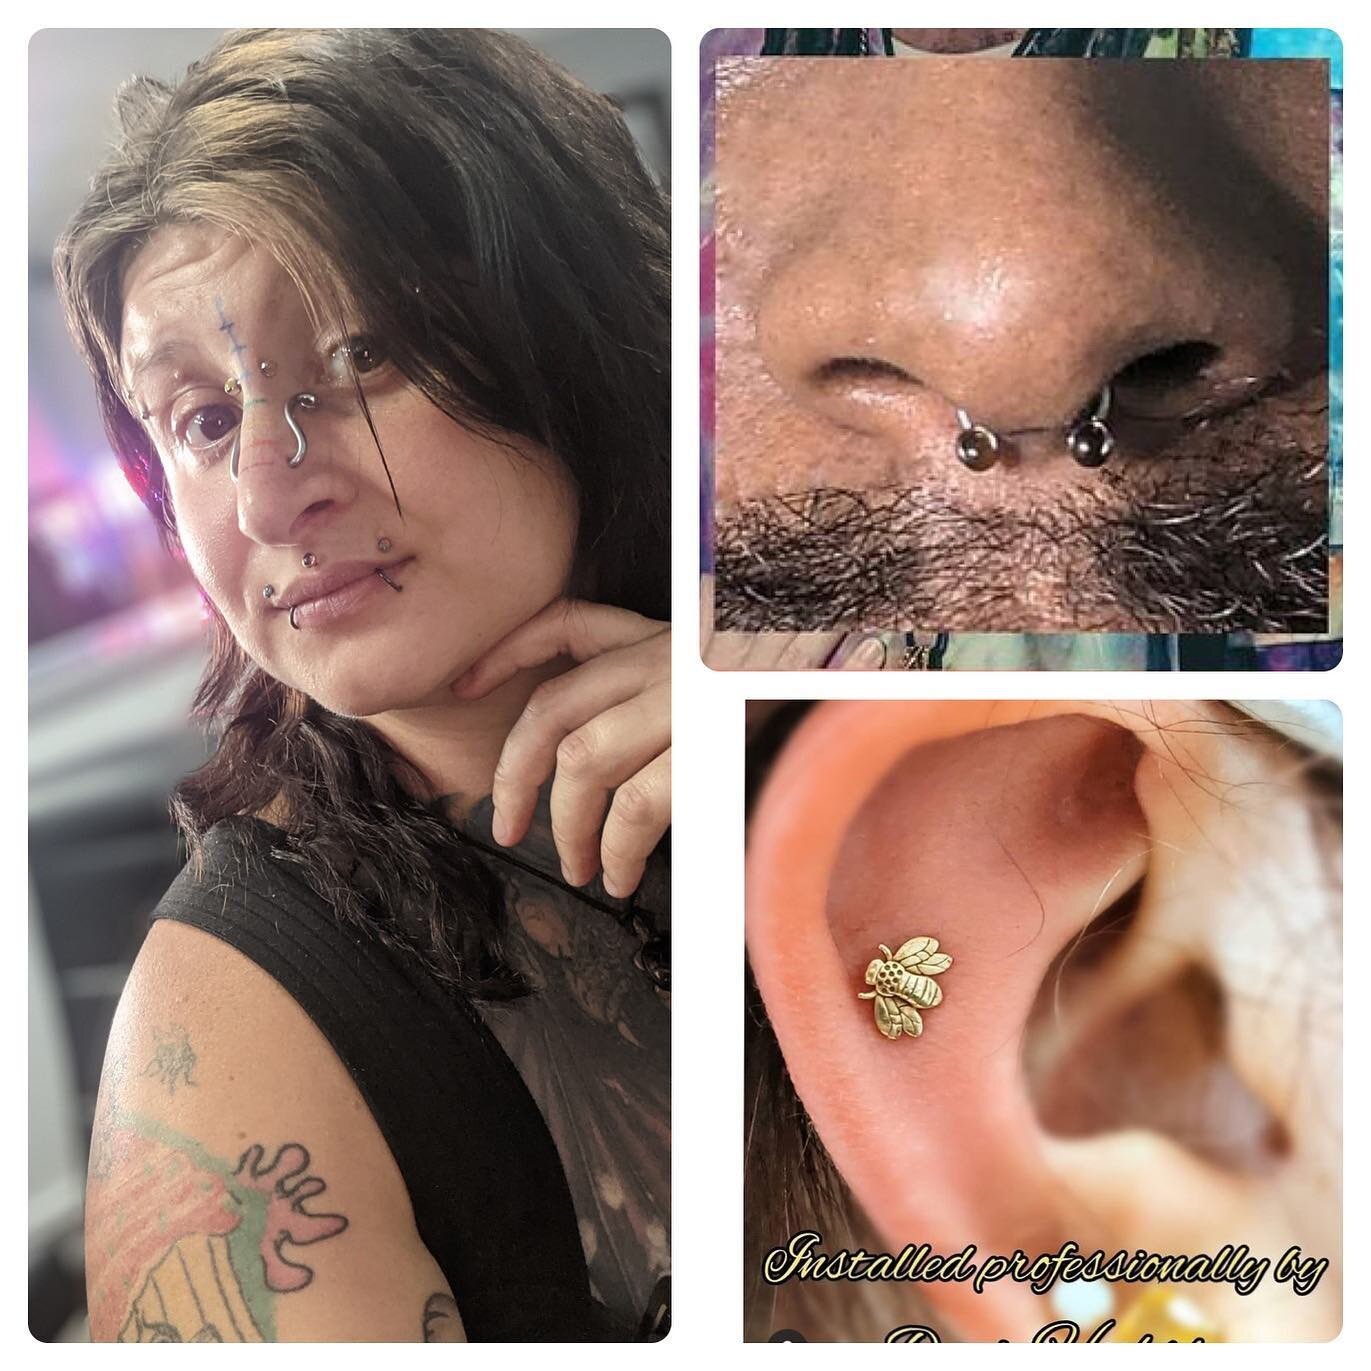 Hey Planet 3 Team.  We are excited to announce that @daniehooks will be doing a guest spot with us on 8/24 and 8/25!  You can book with her online at Planet3piercing.com